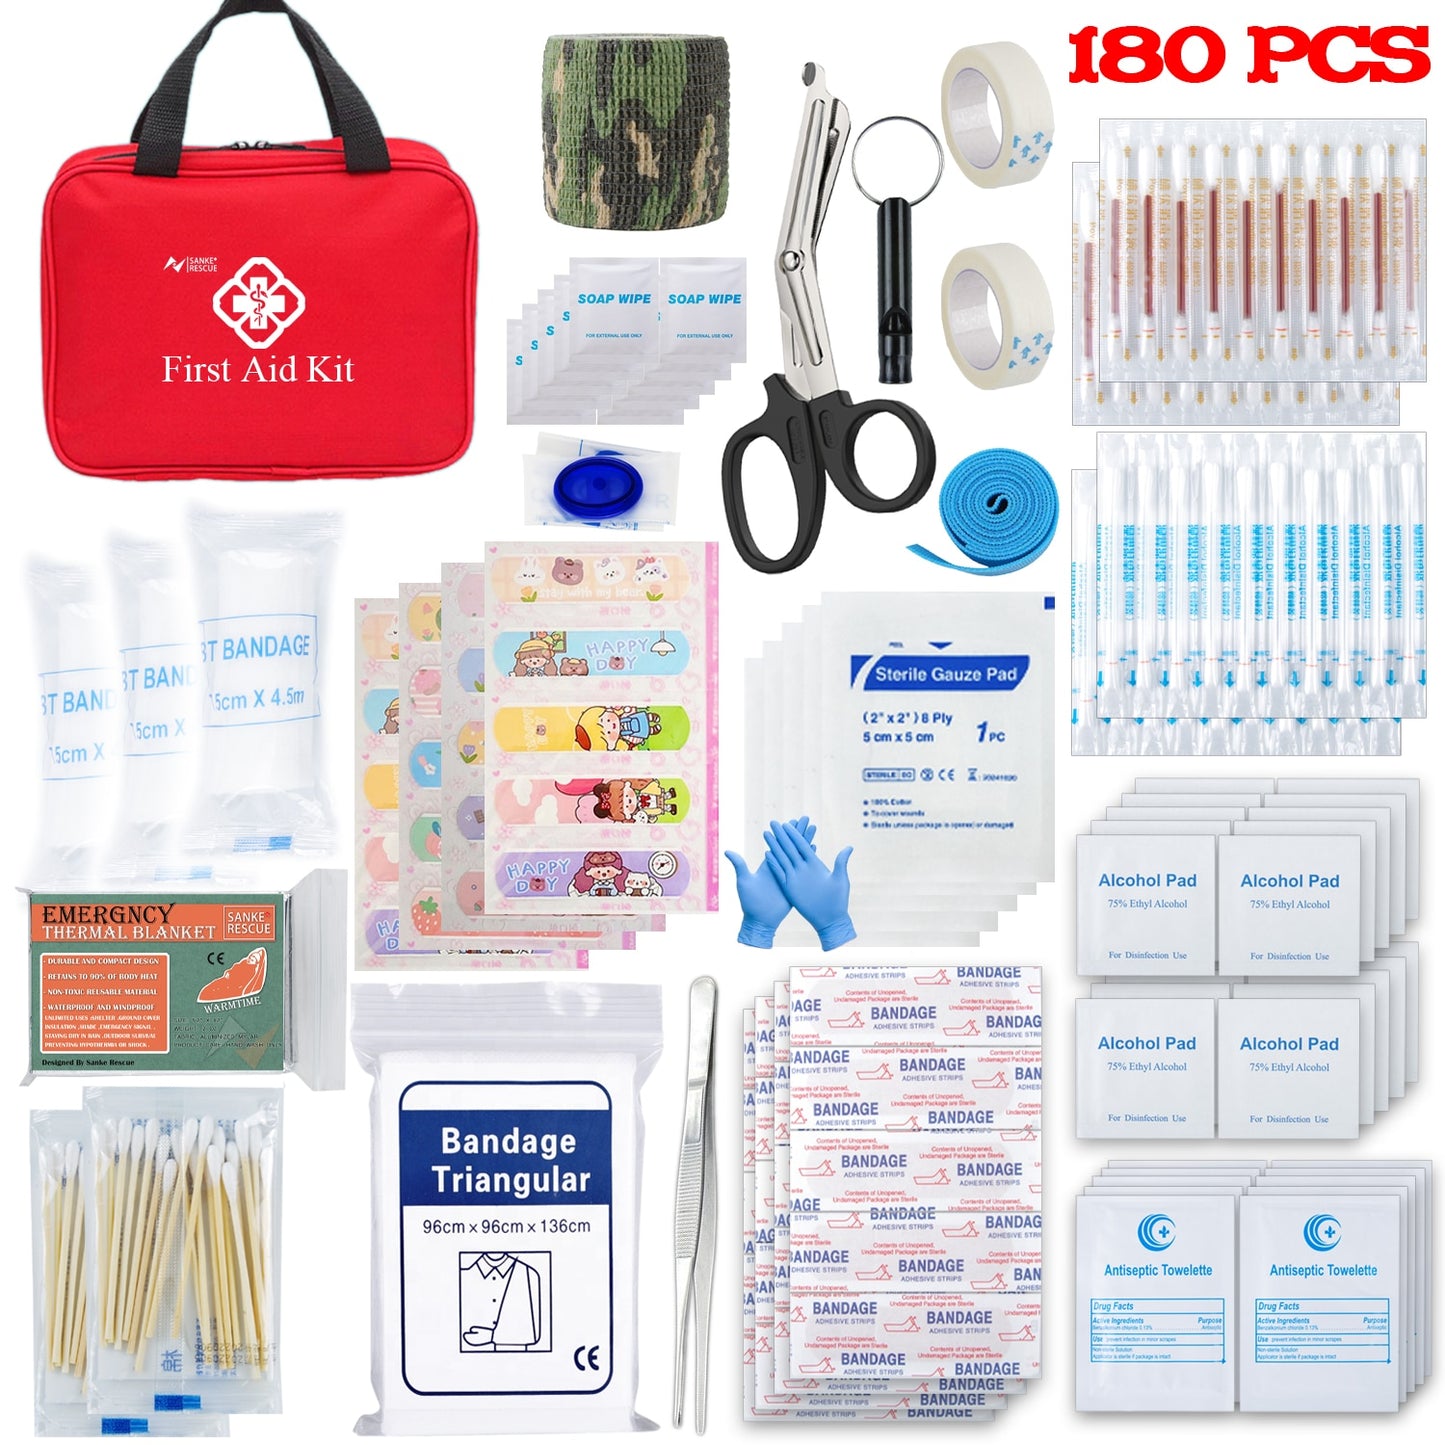 First Aid Kit 180 Piece All-Purpose Tactical Emergency Kit